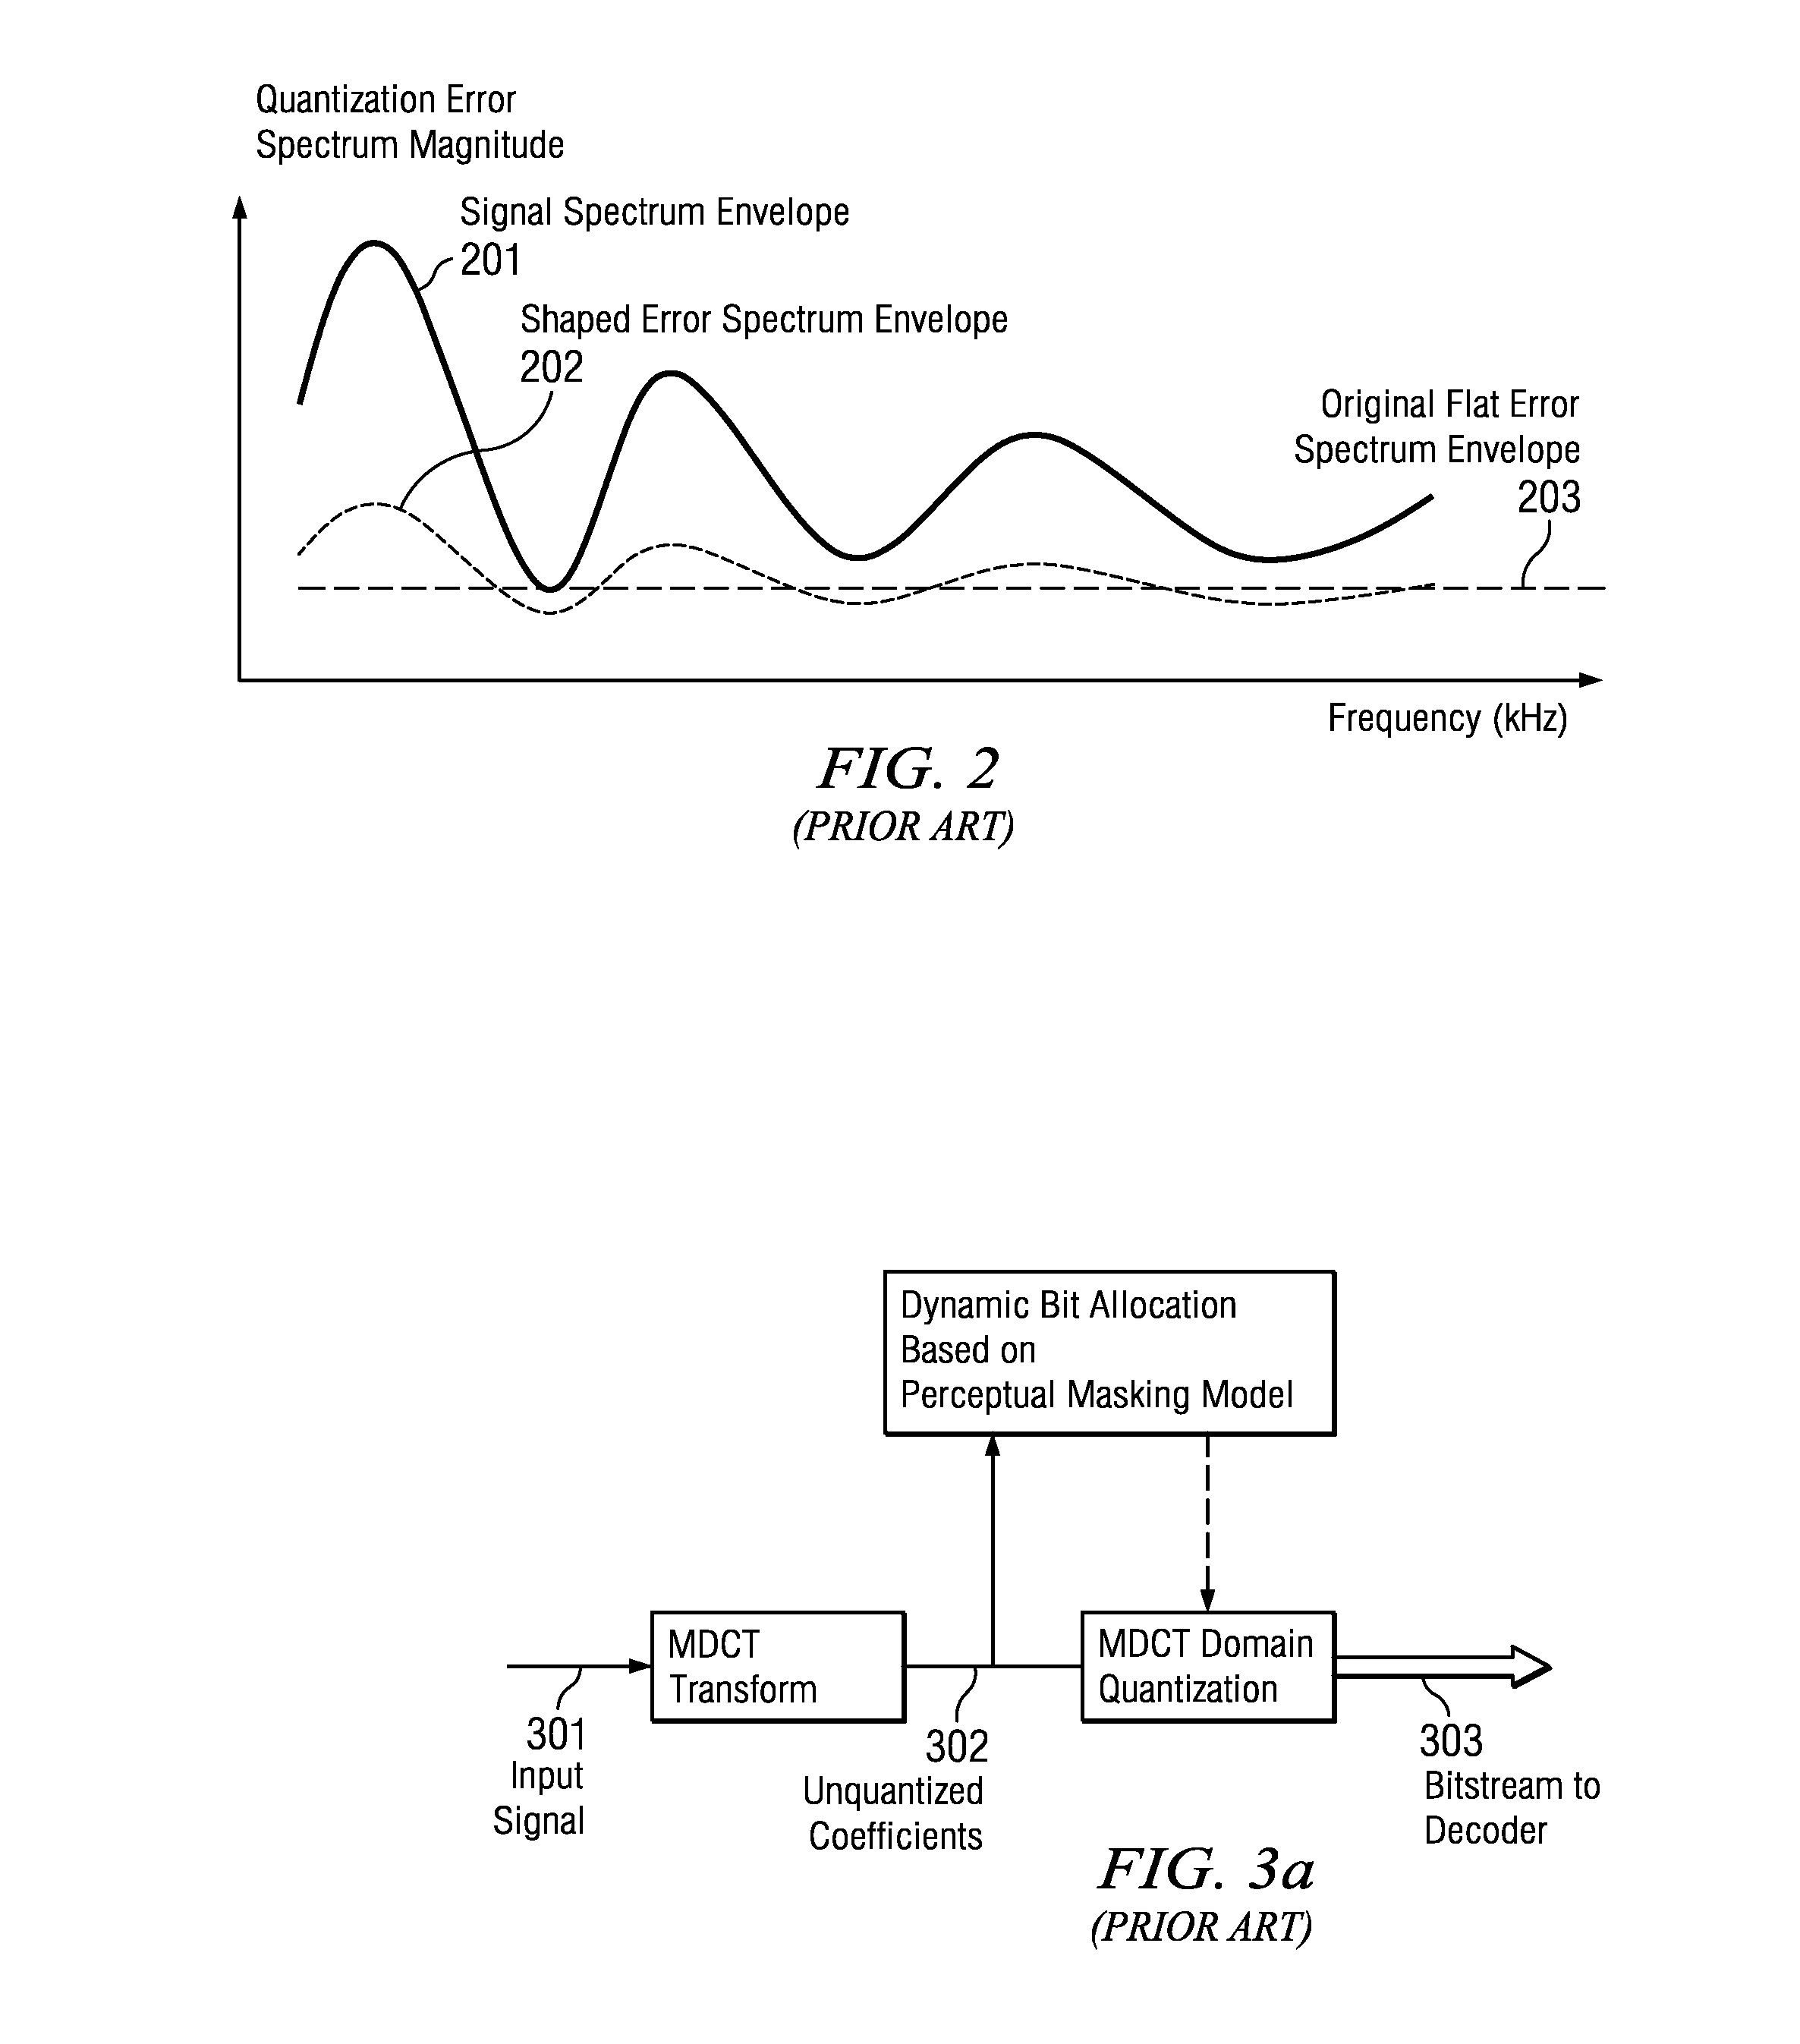 System and Method for Frequency Domain Audio Post-processing Based on Perceptual Masking